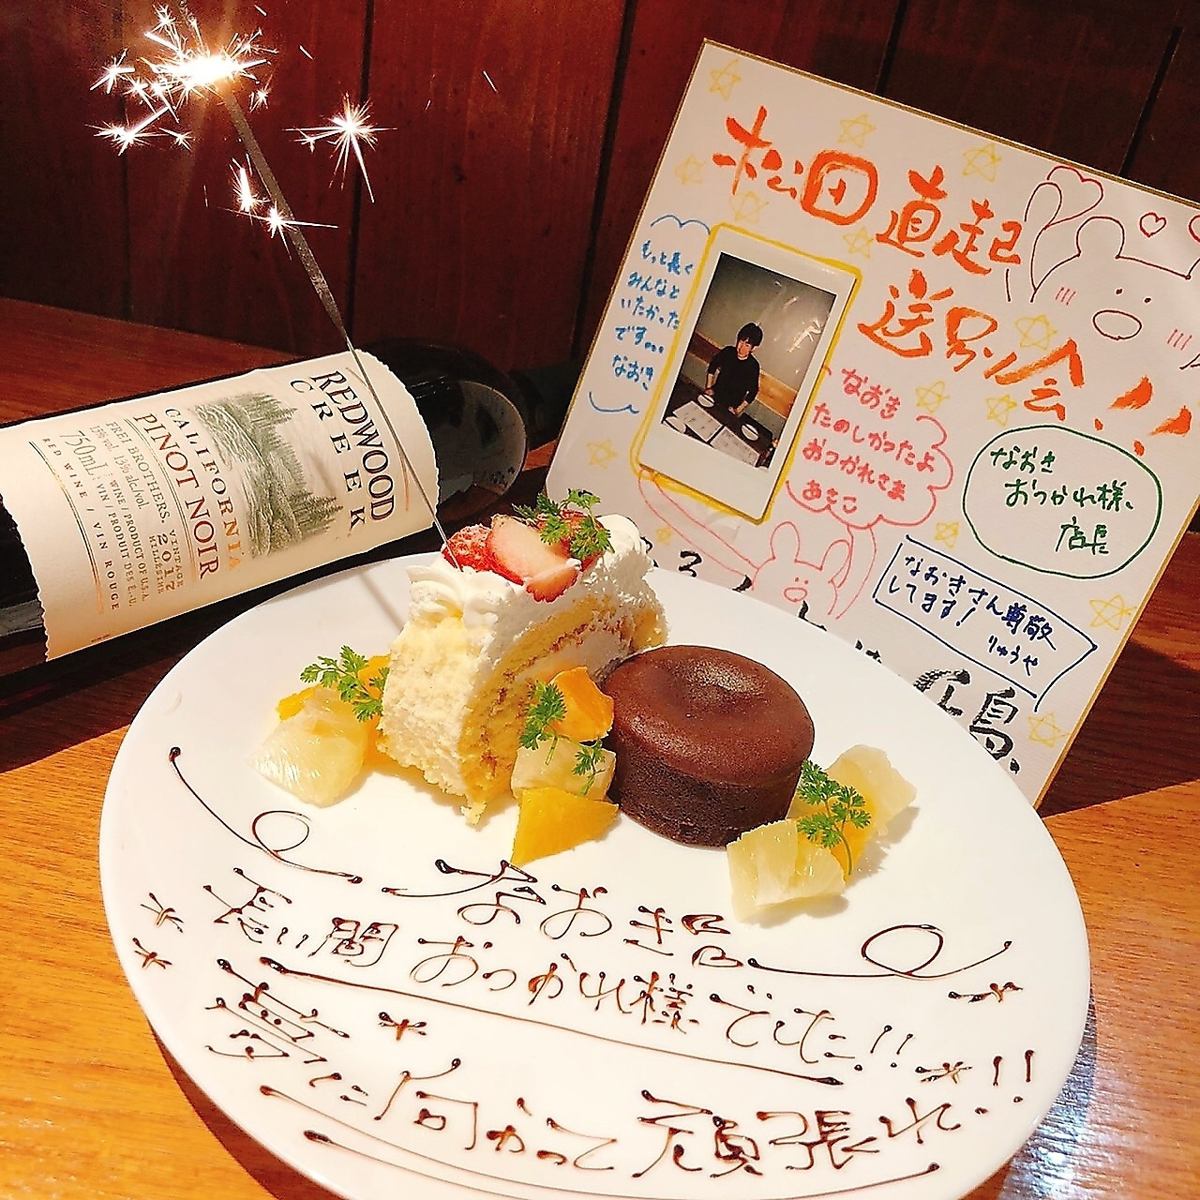 KAKURE's private room can accommodate up to 16 people♪ You can have a party without worrying about your surroundings★